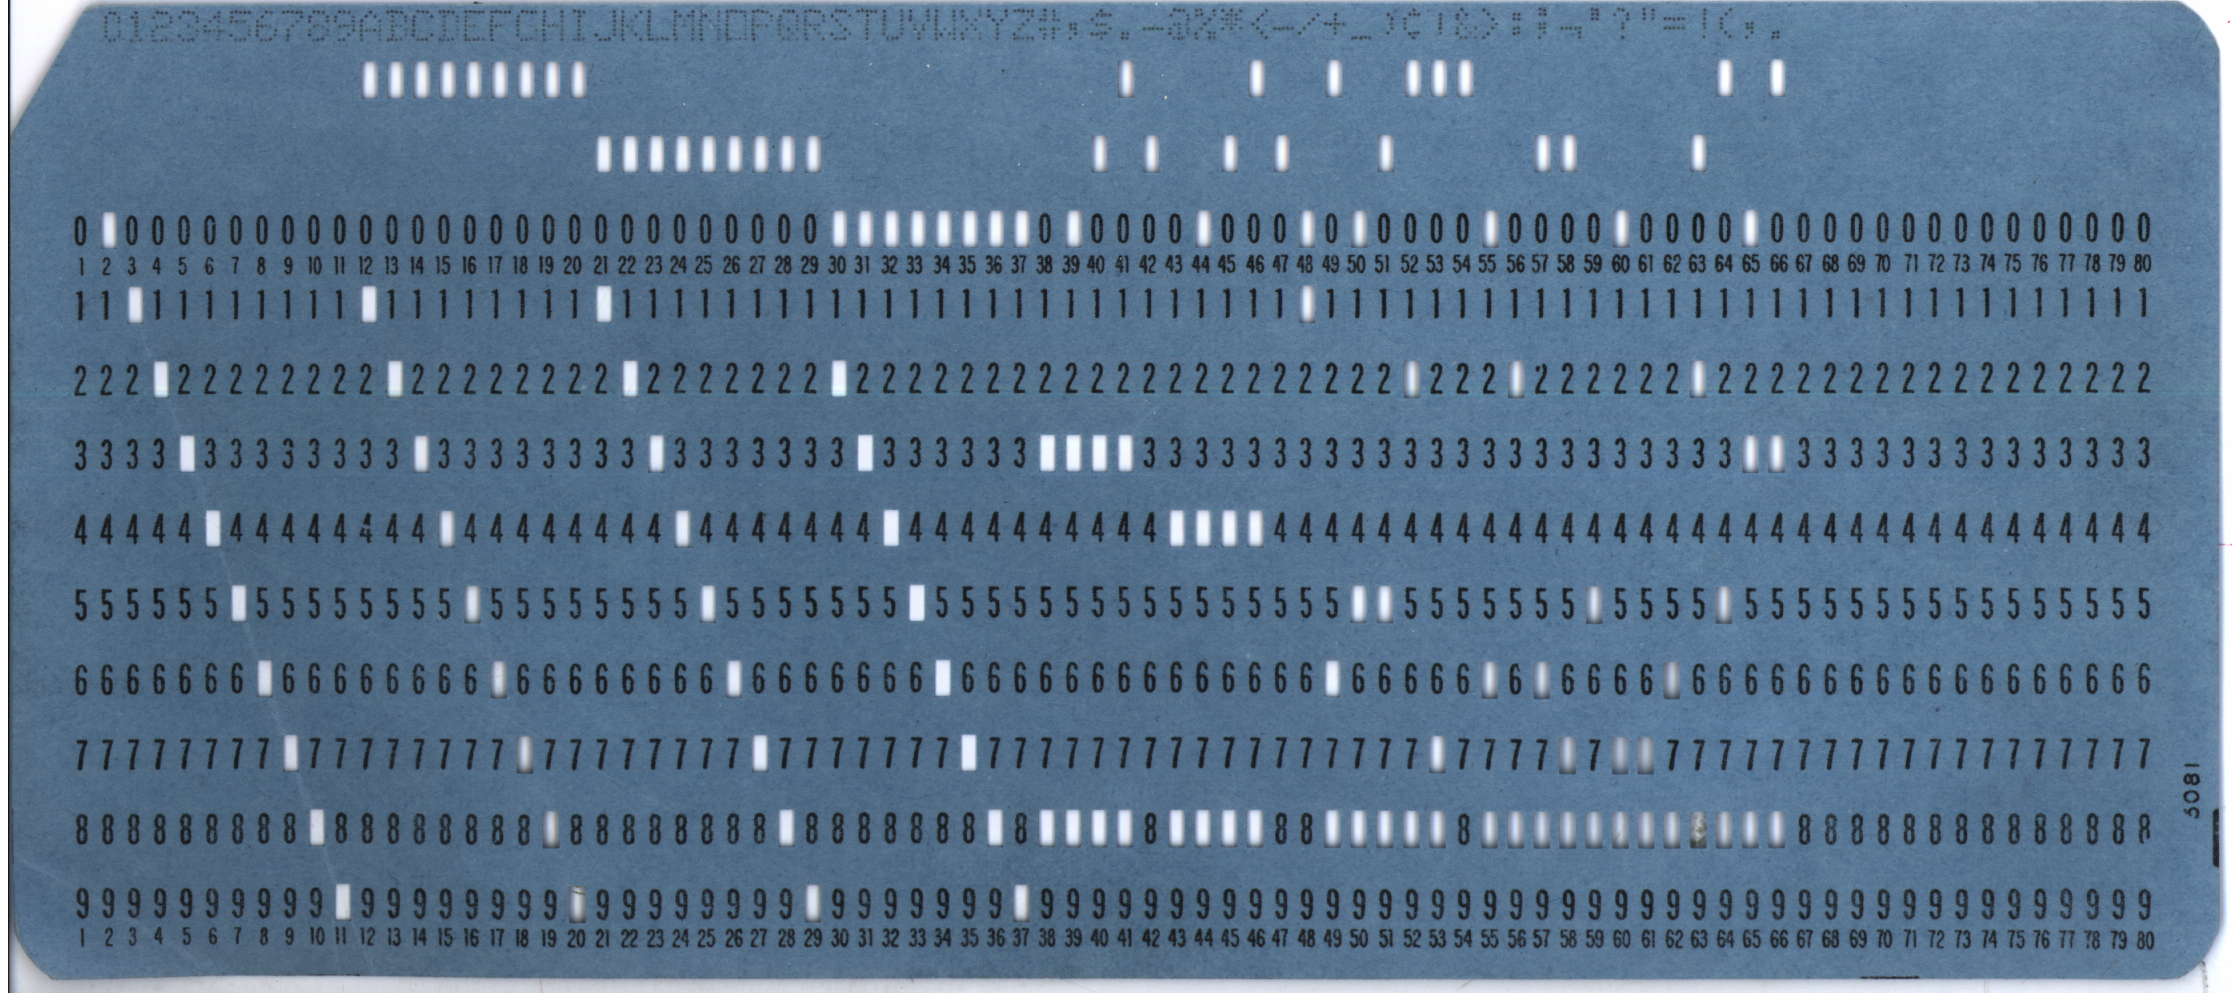 IBM punch card, showing the layout of the card